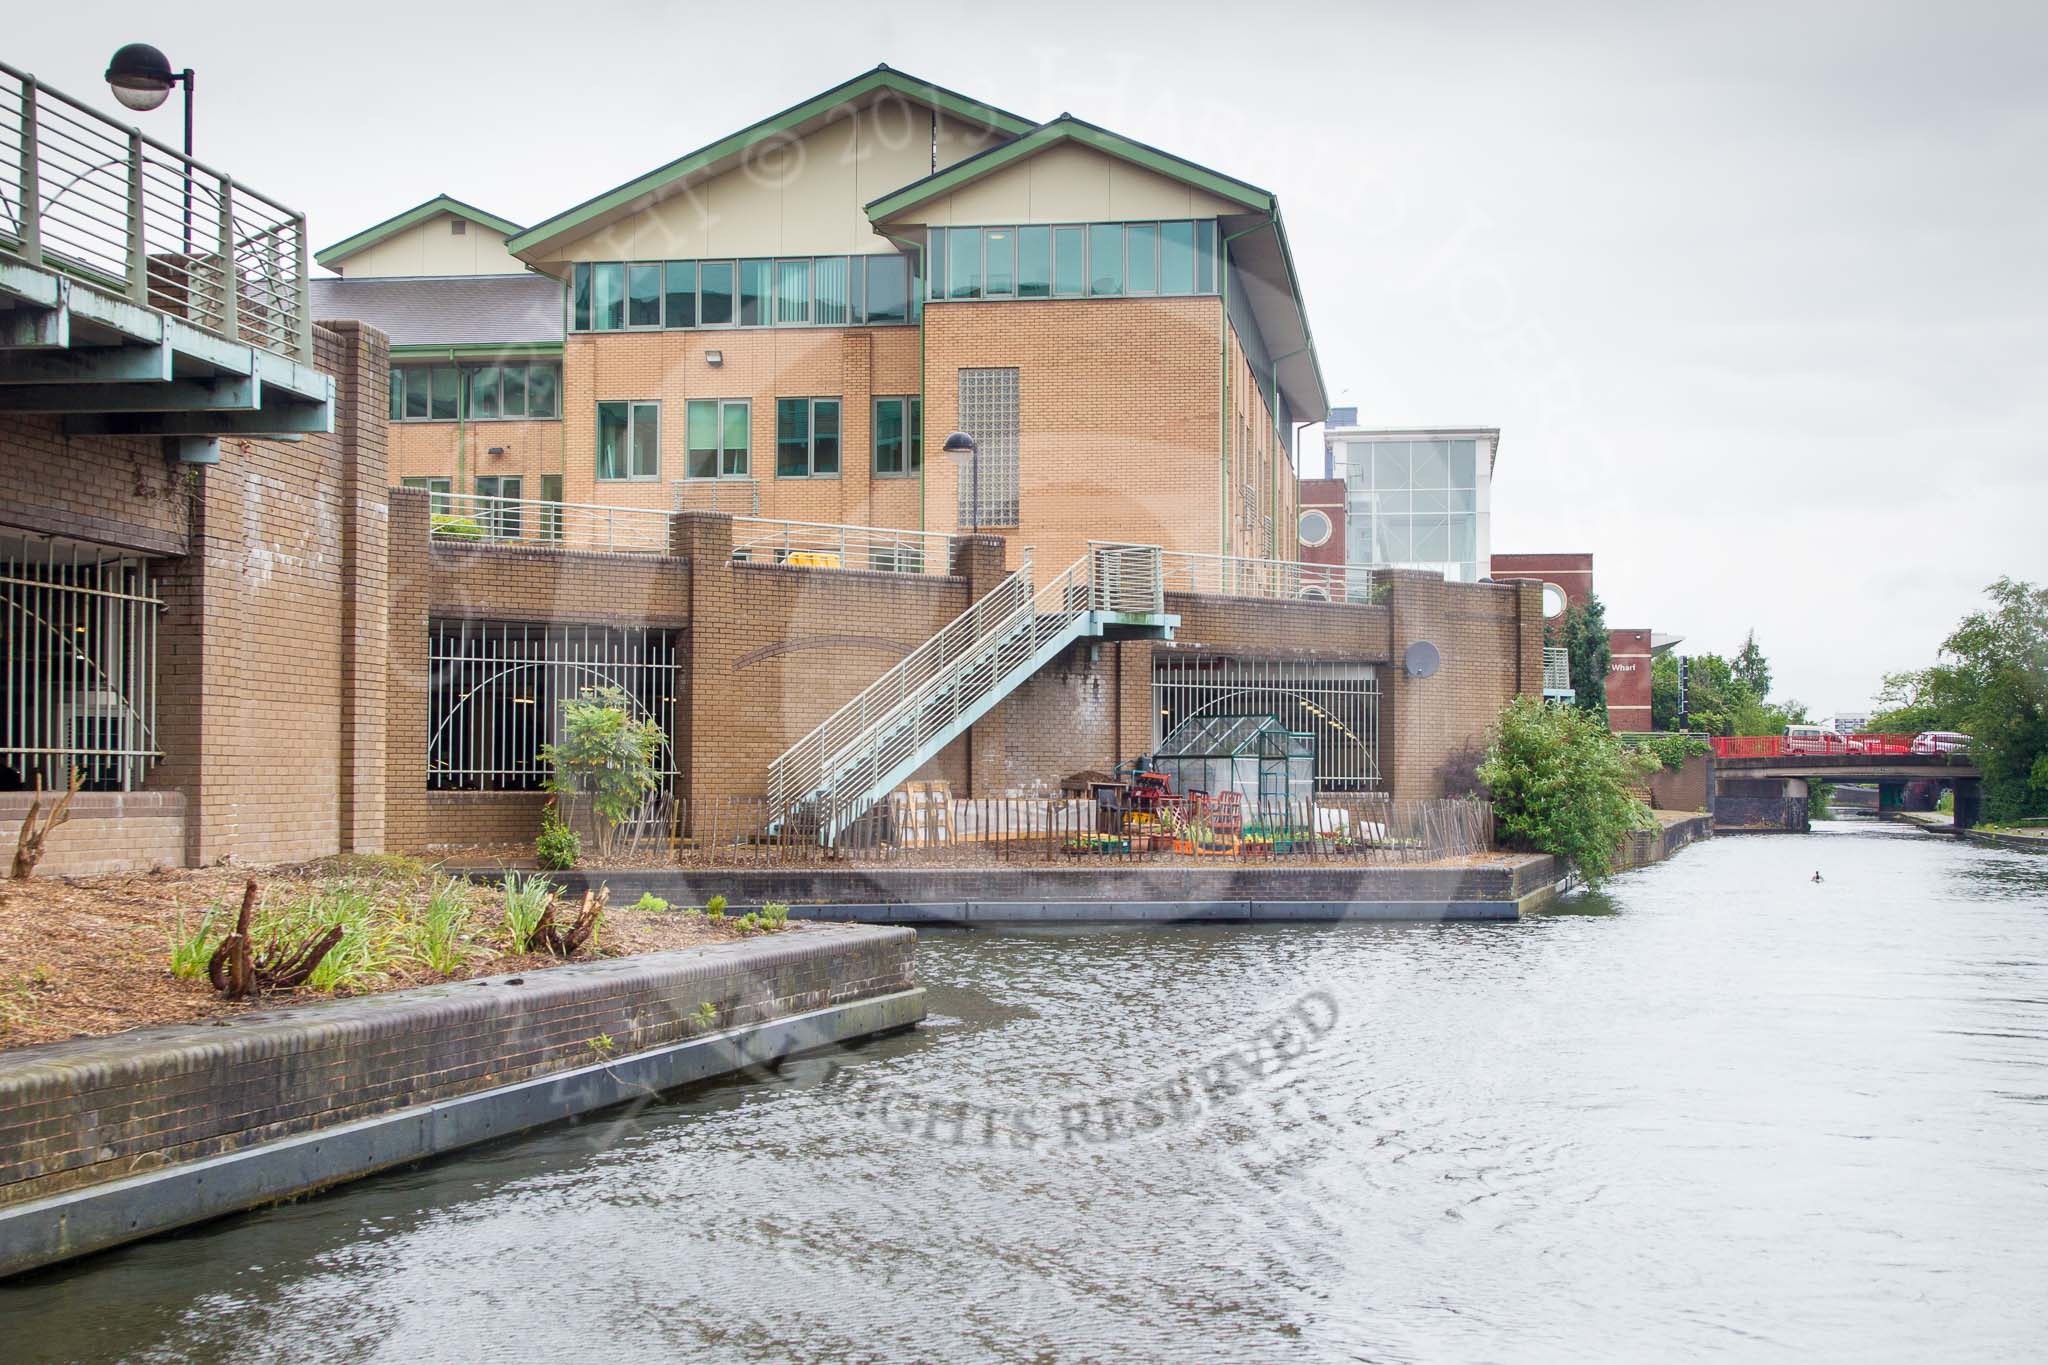 BCN Marathon Challenge 2014: Modern buildings at the Digbeth Branch ahead of ahead of Ashted Tunnel..
Birmingham Canal Navigation,


United Kingdom,
on 23 May 2014 at 15:31, image #46